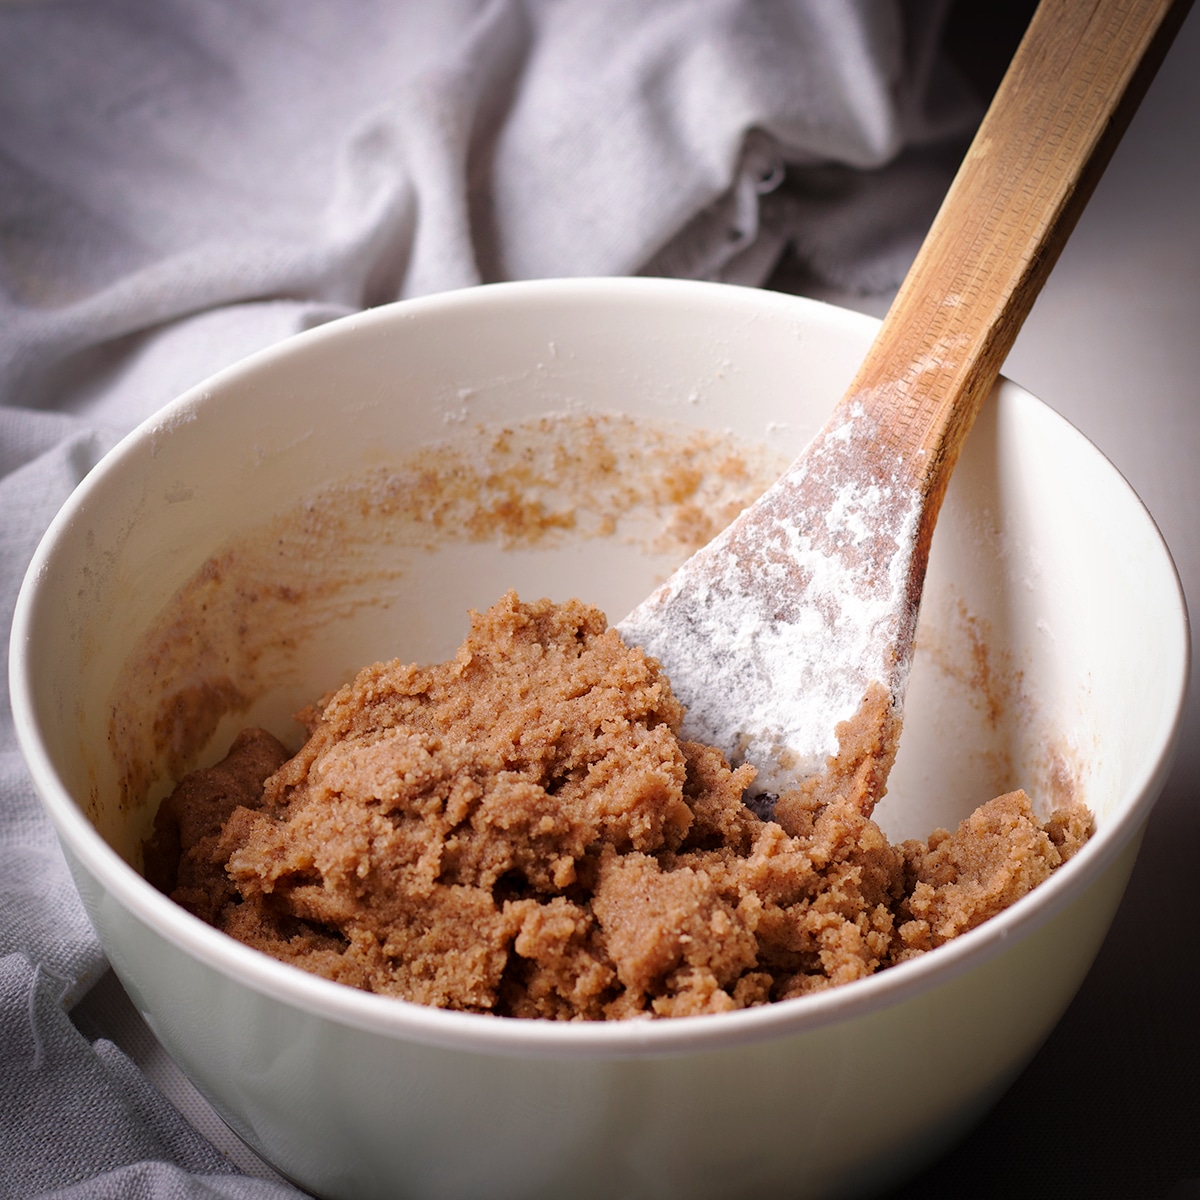 Using a wooden spoon to mix the ingredients for the crumb topping.